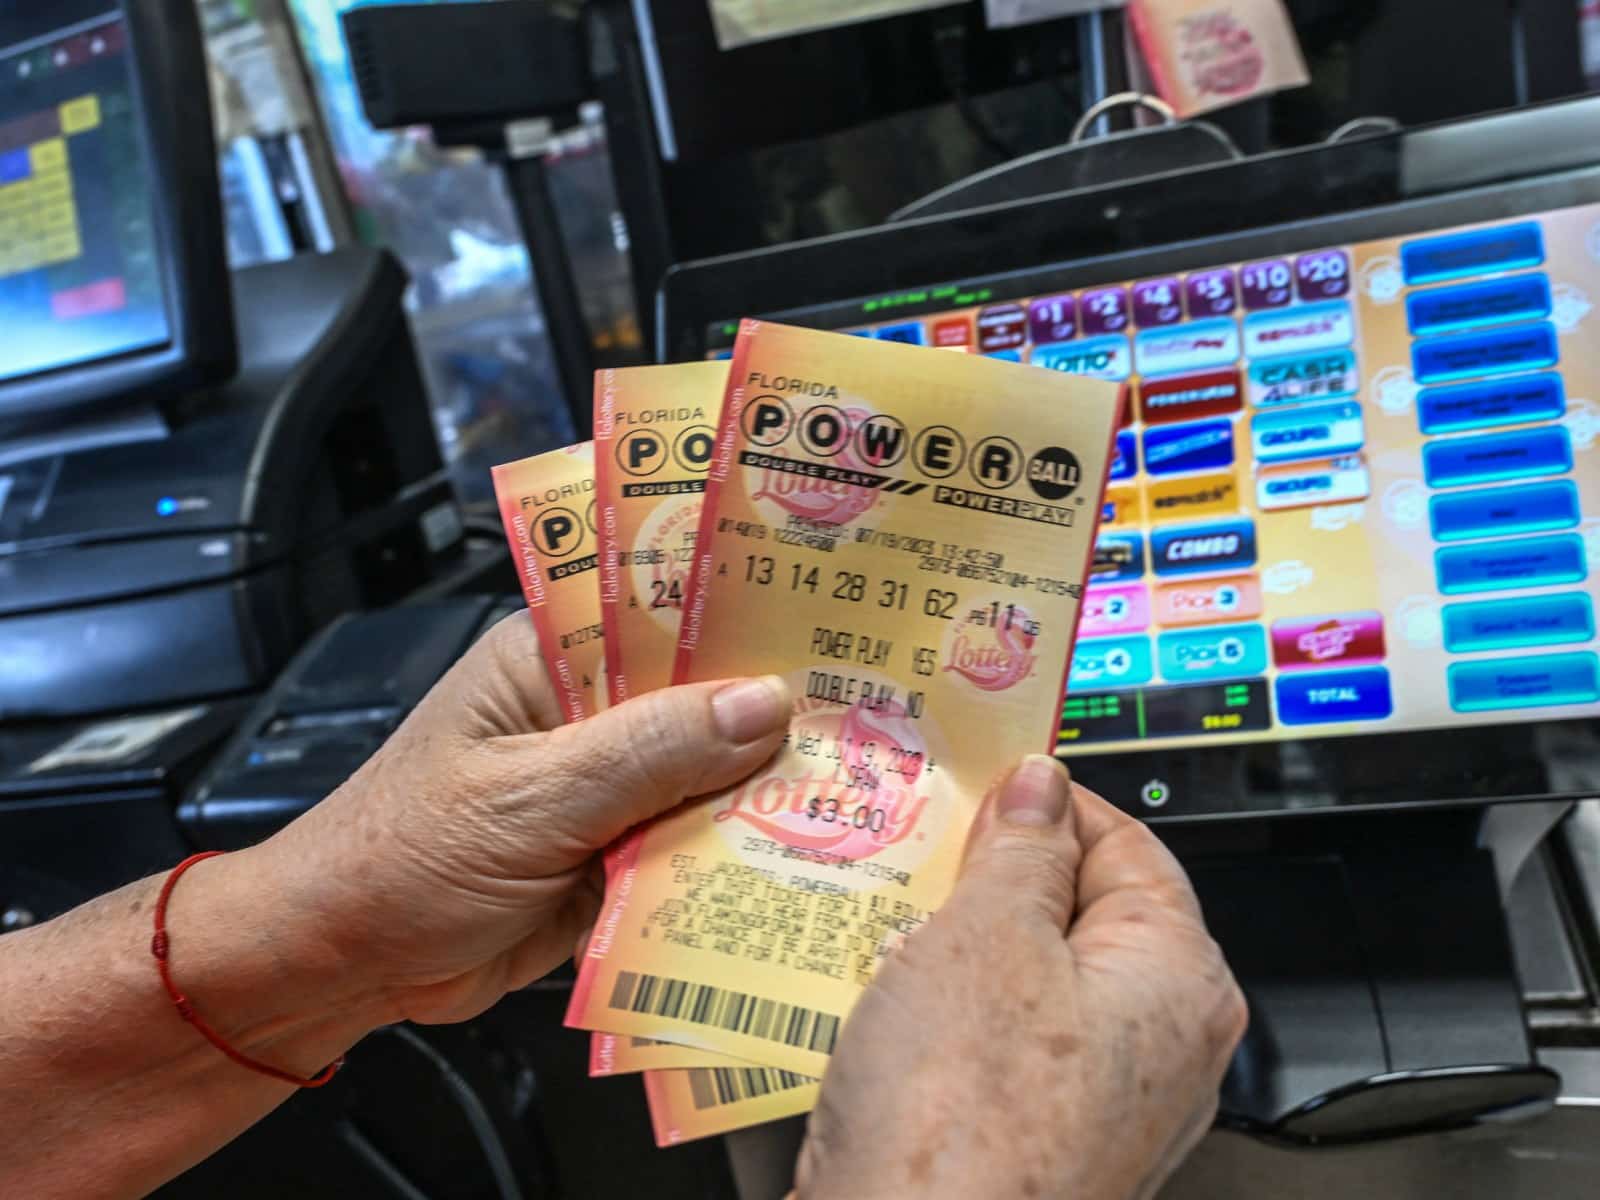 How Late Can You Buy Powerball Tickets